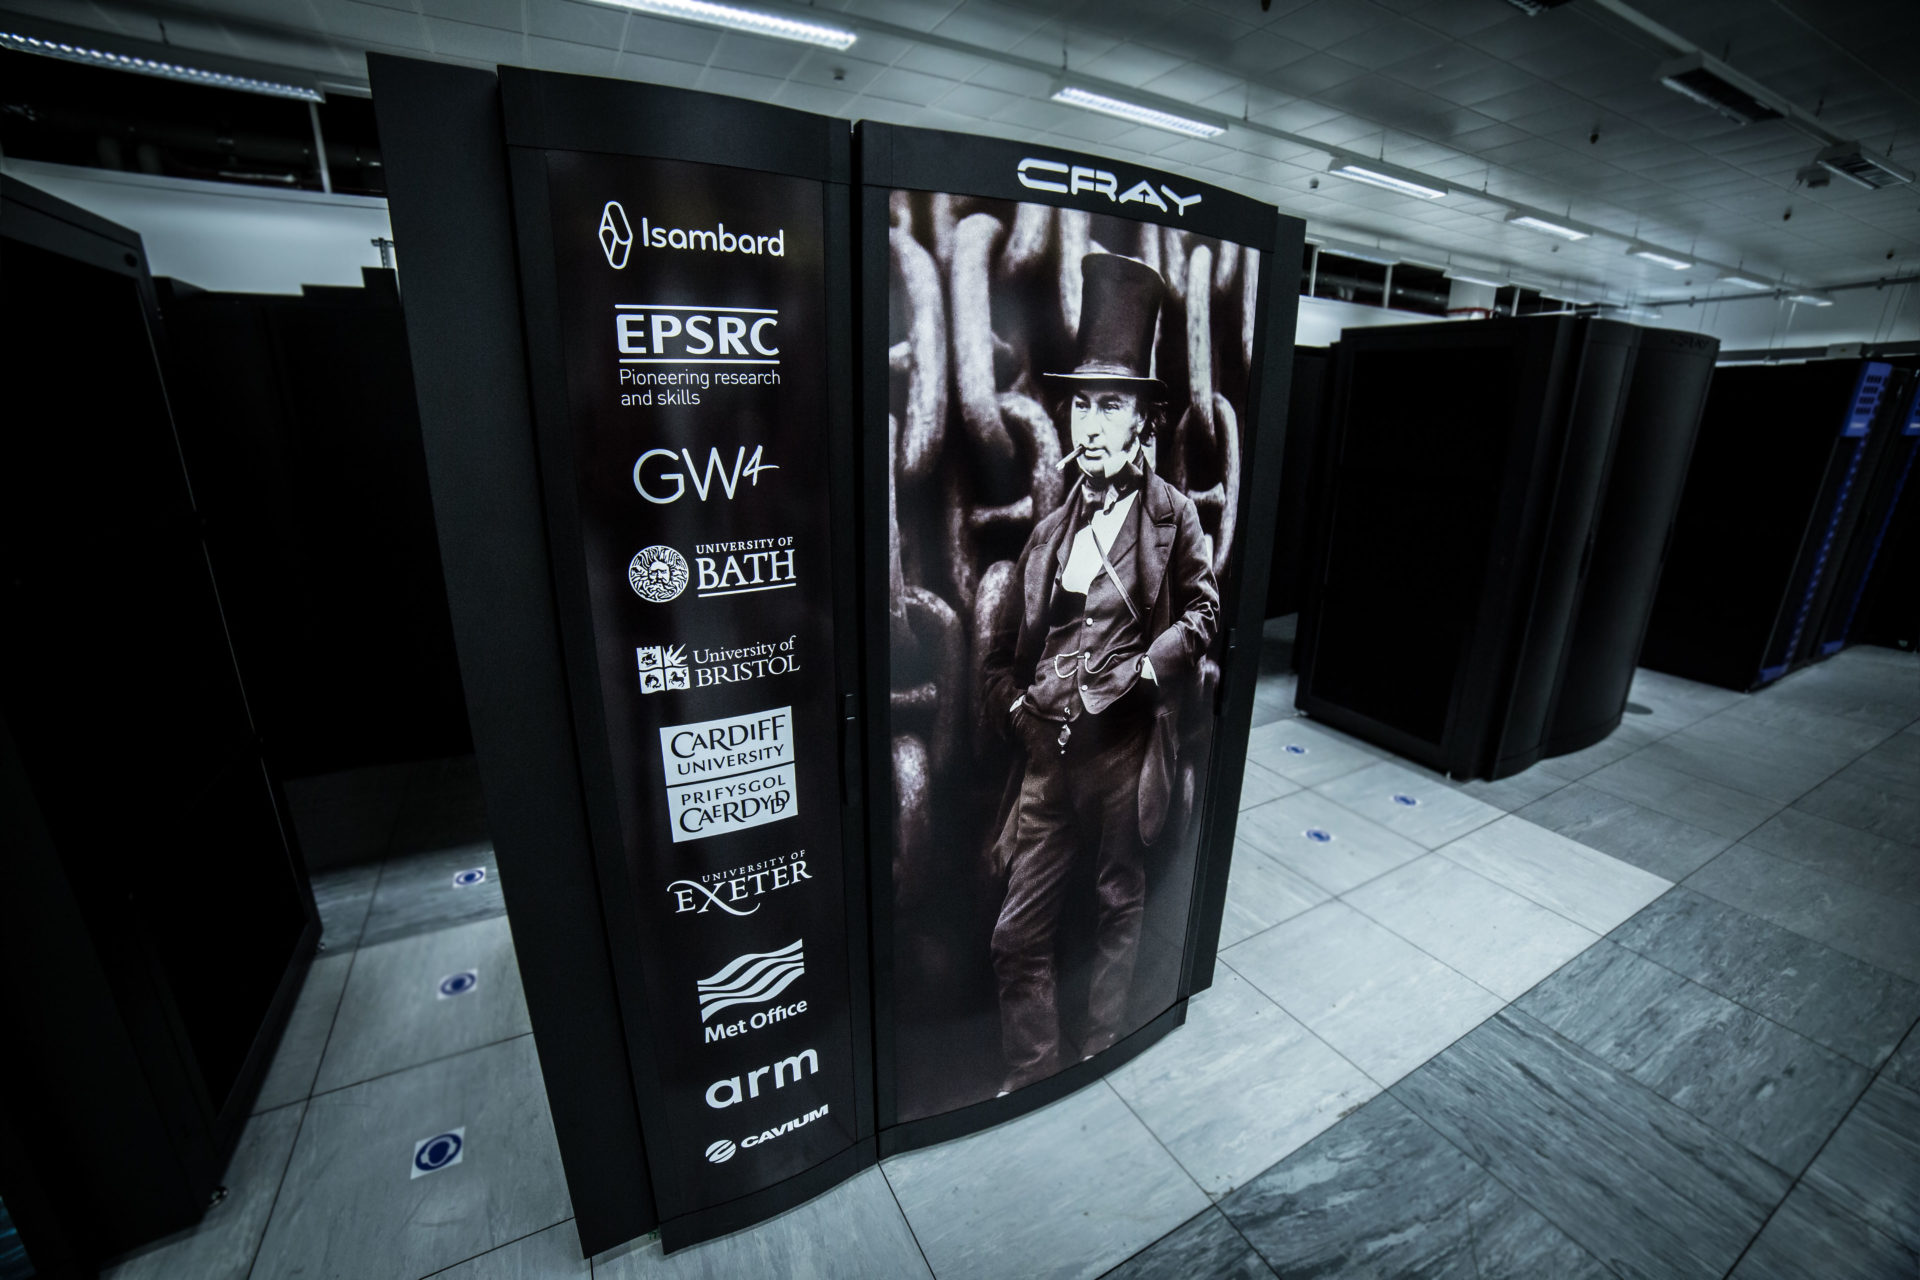 South West to host Europe’s largest Arm supercomputer